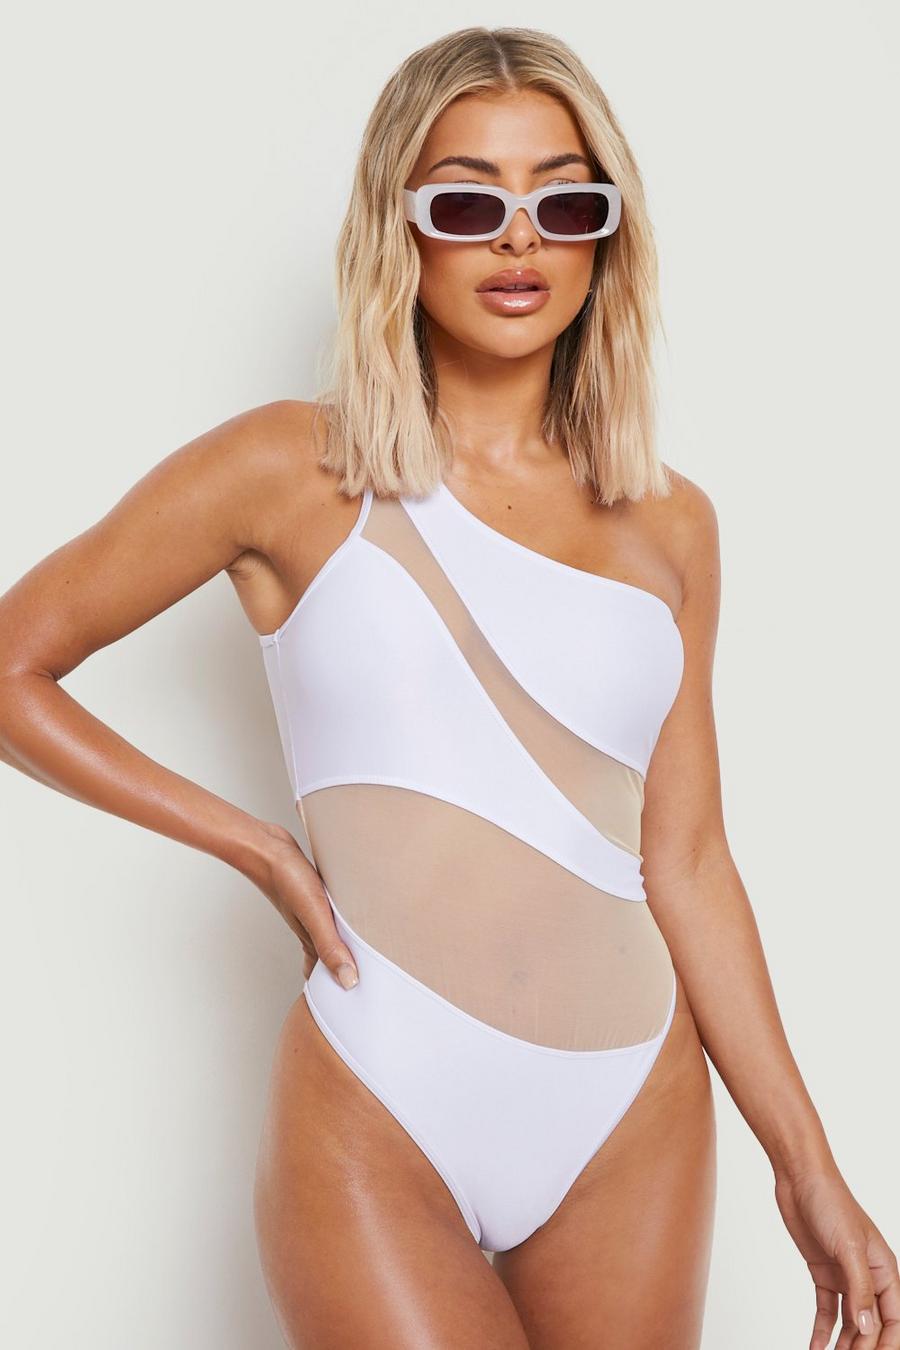 I just bought this one-shoulder bathing suit top. Anything I can